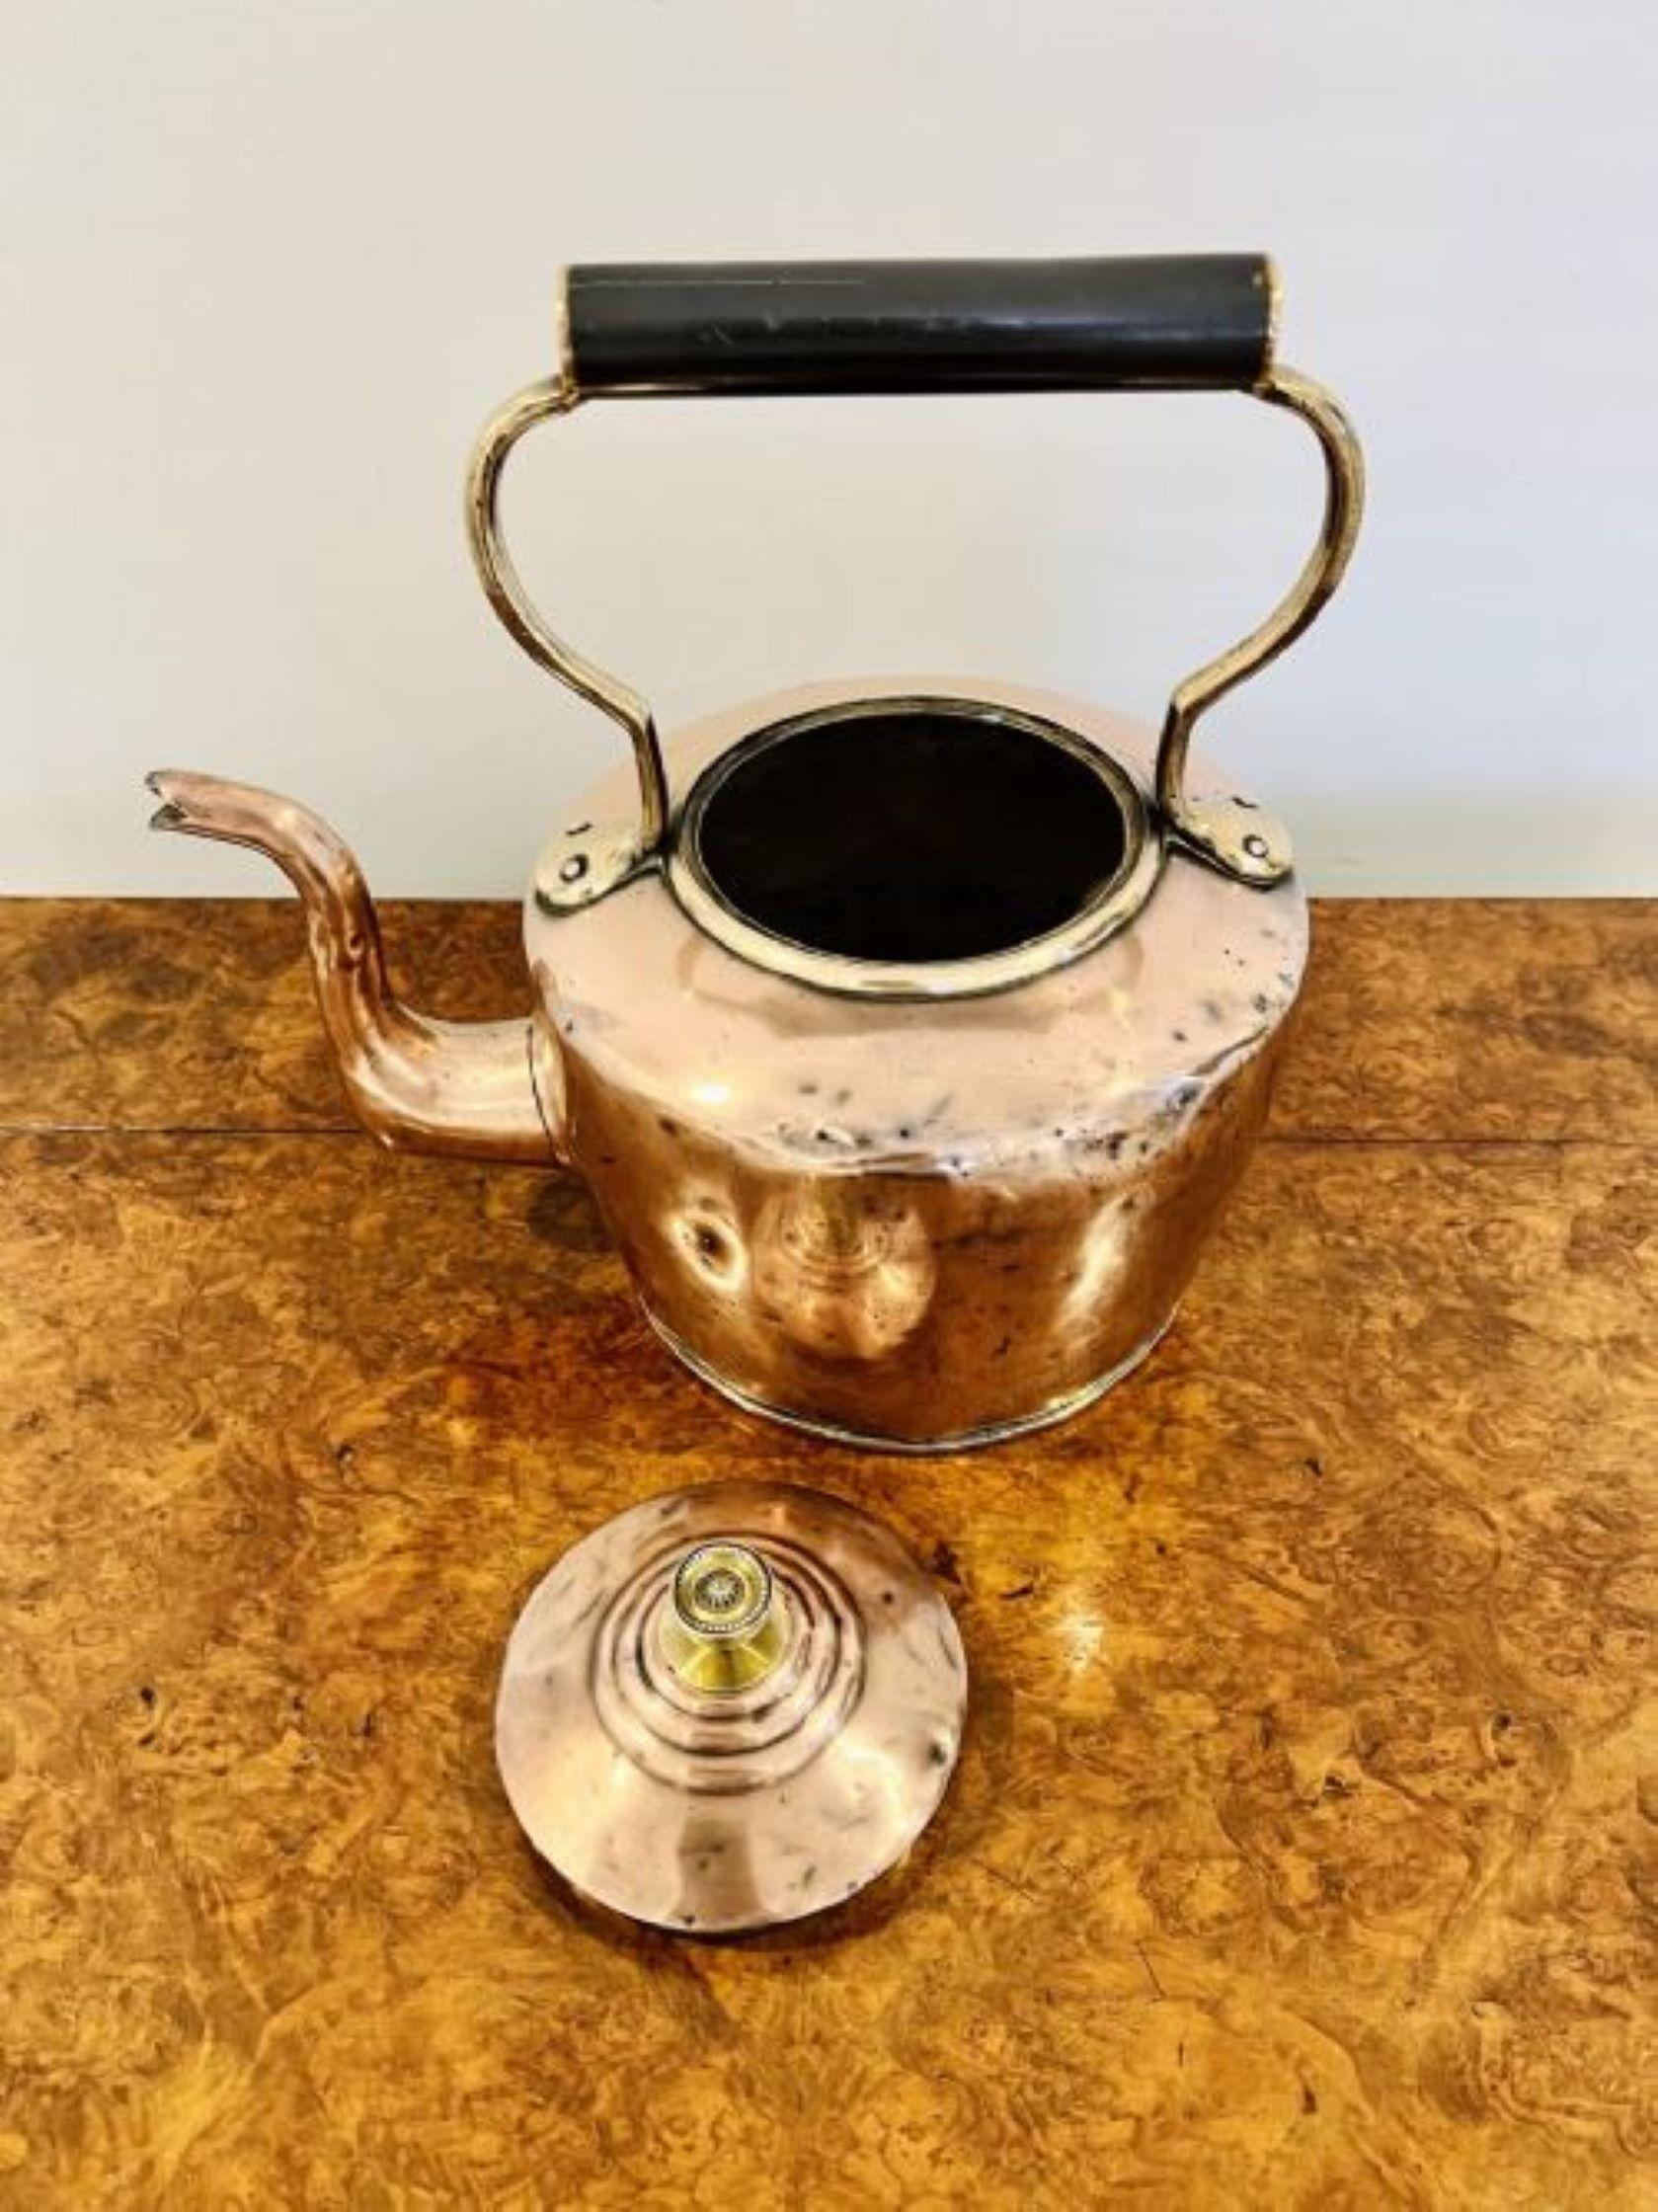 Large antique George III copper kettle having a shaped handle and spout, lift off lid with the original original ornate brass knob.